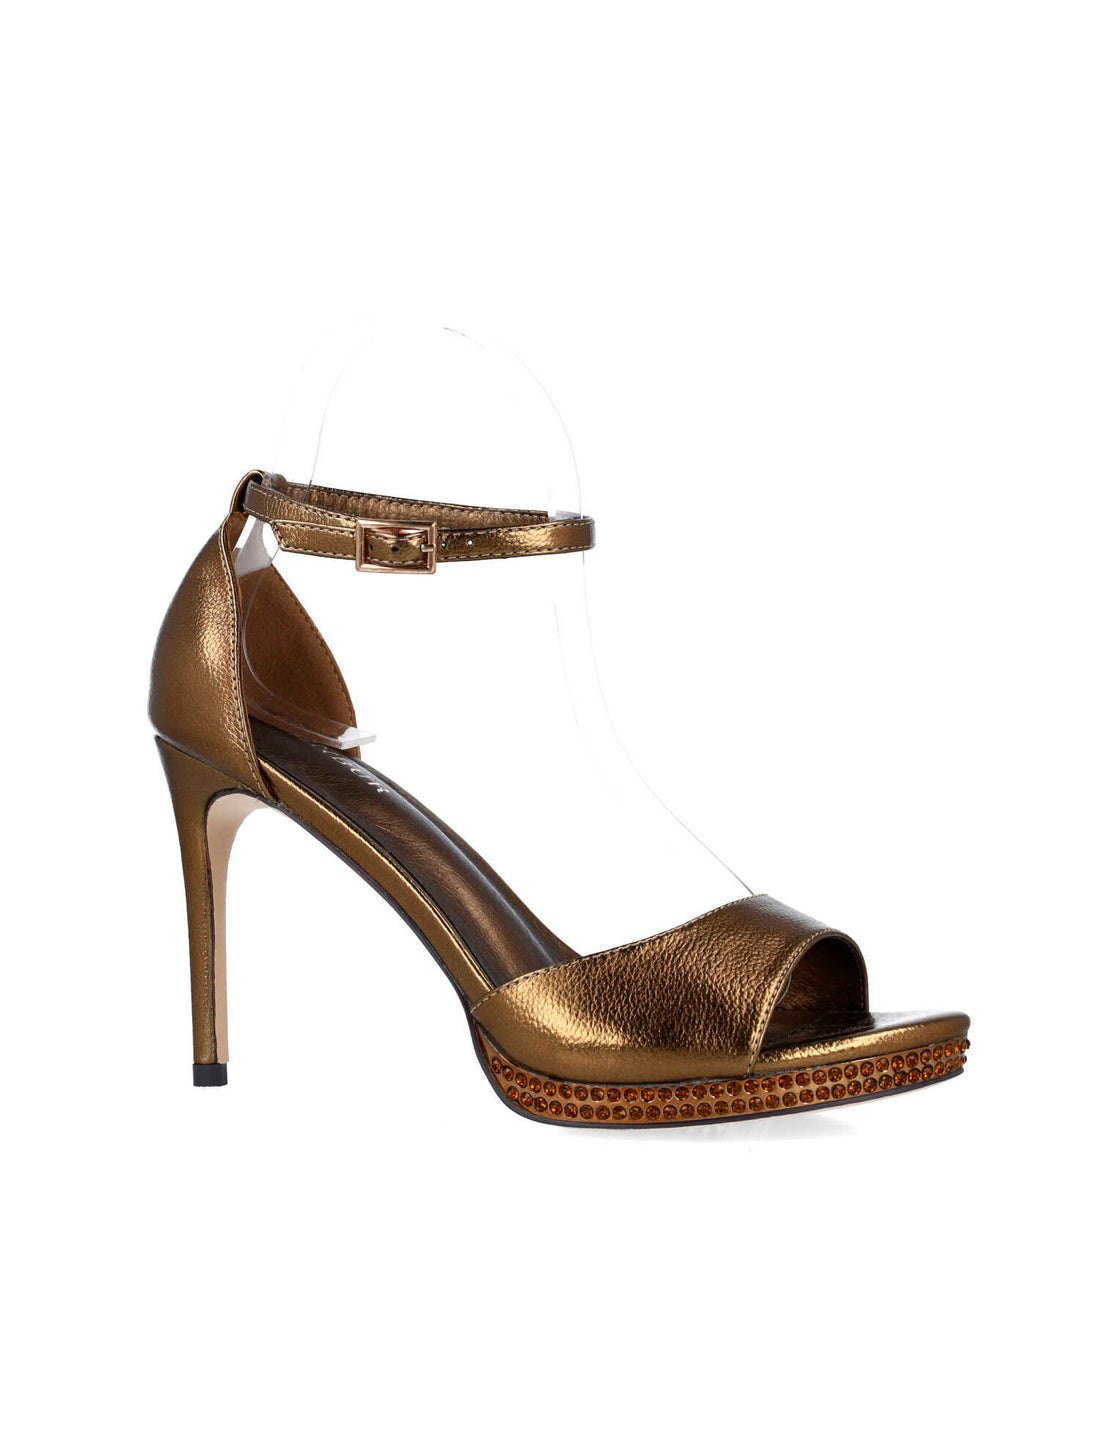 Shiny Brown High-Heel Sandals With Ankle Strap_25157_95_02